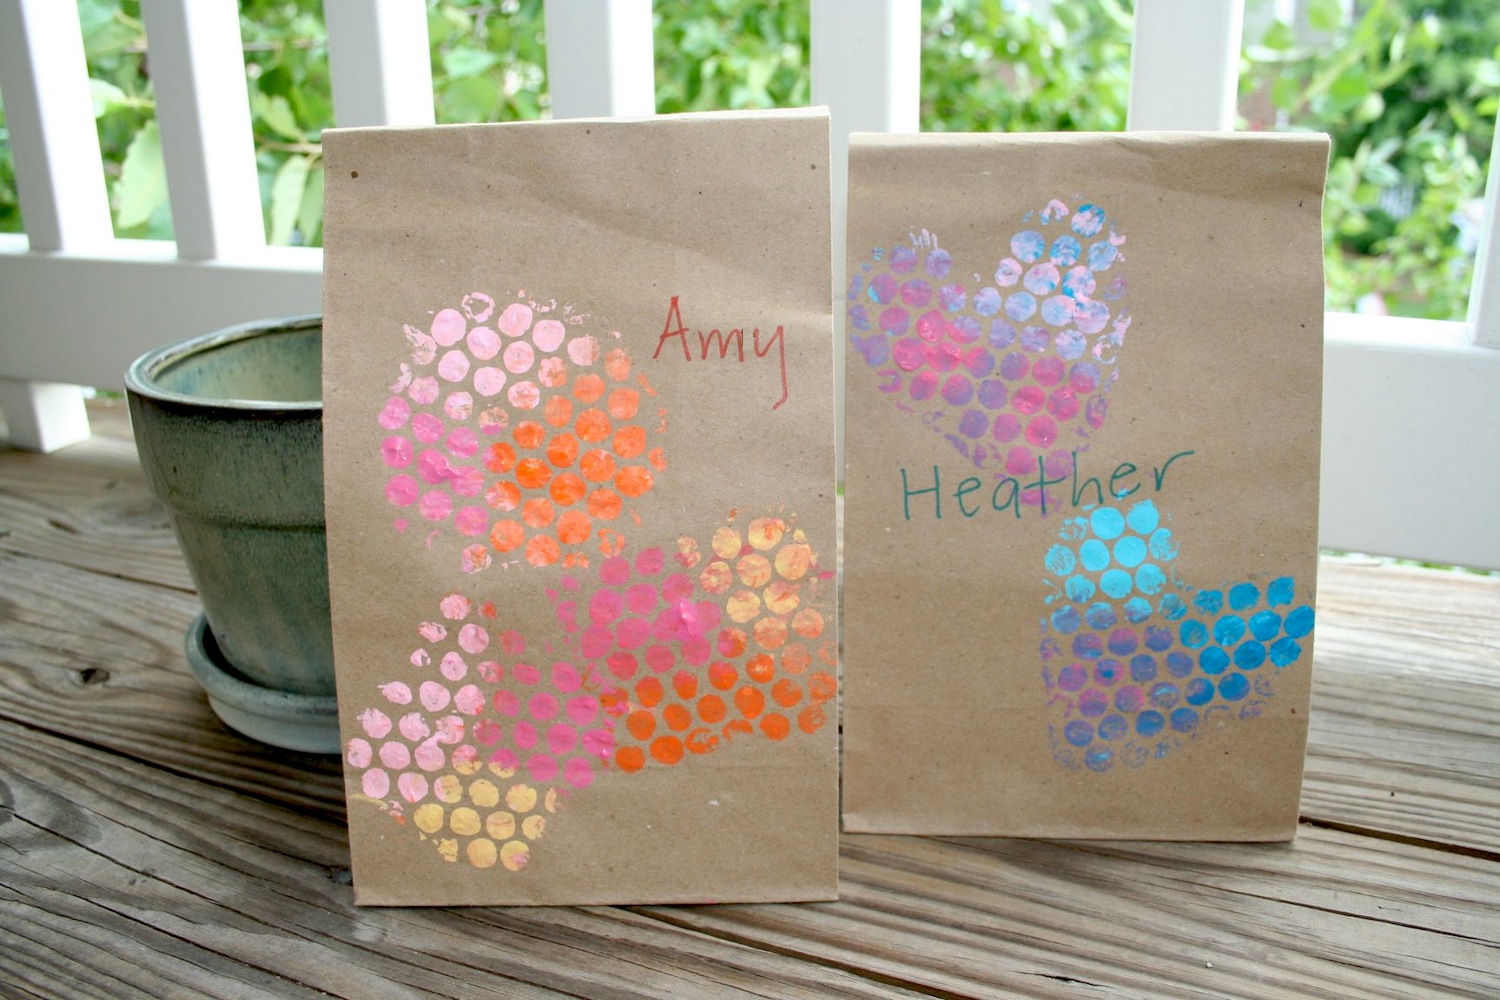 Lunch Bag Art Craft Camp | Skip To My Lou